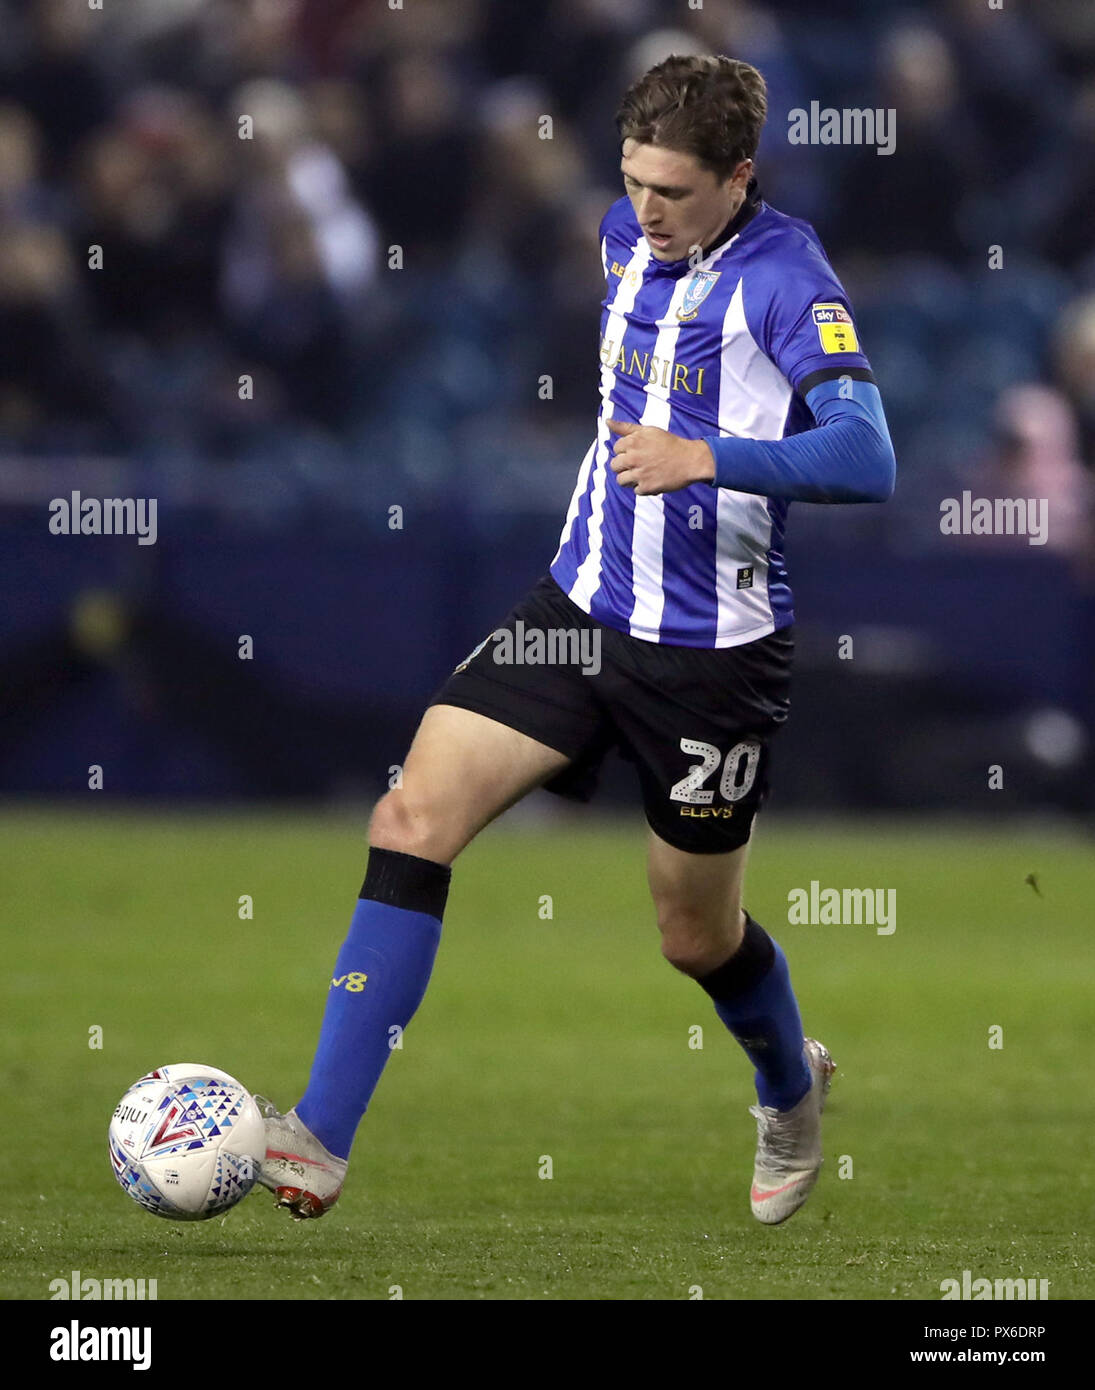 Sheffield Wednesday's Adam Reach during the Sky Bet Championship match at Hillsborough, Sheffield. PRESS ASSOCIATION Photo. Picture date: Friday October 19, 2018. See PA story SOCCER Sheff Wed. Photo credit should read: Tim Goode/PA Wire. RESTRICTIONS: No use with unauthorised audio, video, data, fixture lists, club/league logos or 'live' services. Online in-match use limited to 120 images, no video emulation. No use in betting, games or single club/league/player publications. Stock Photo